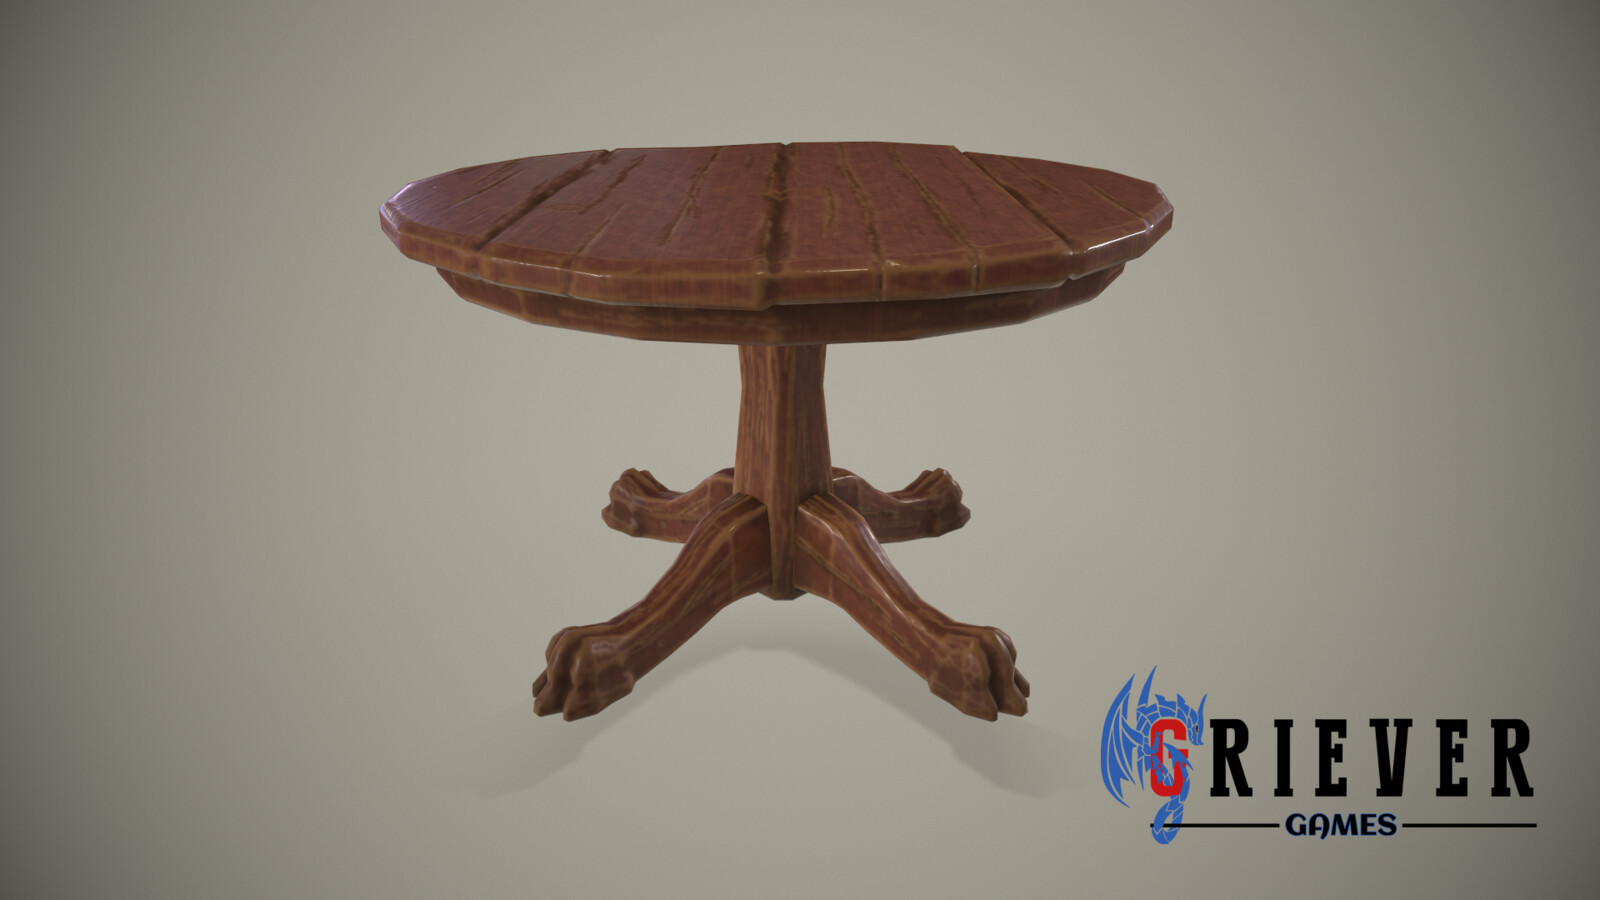 A well used claw foot wooden table.